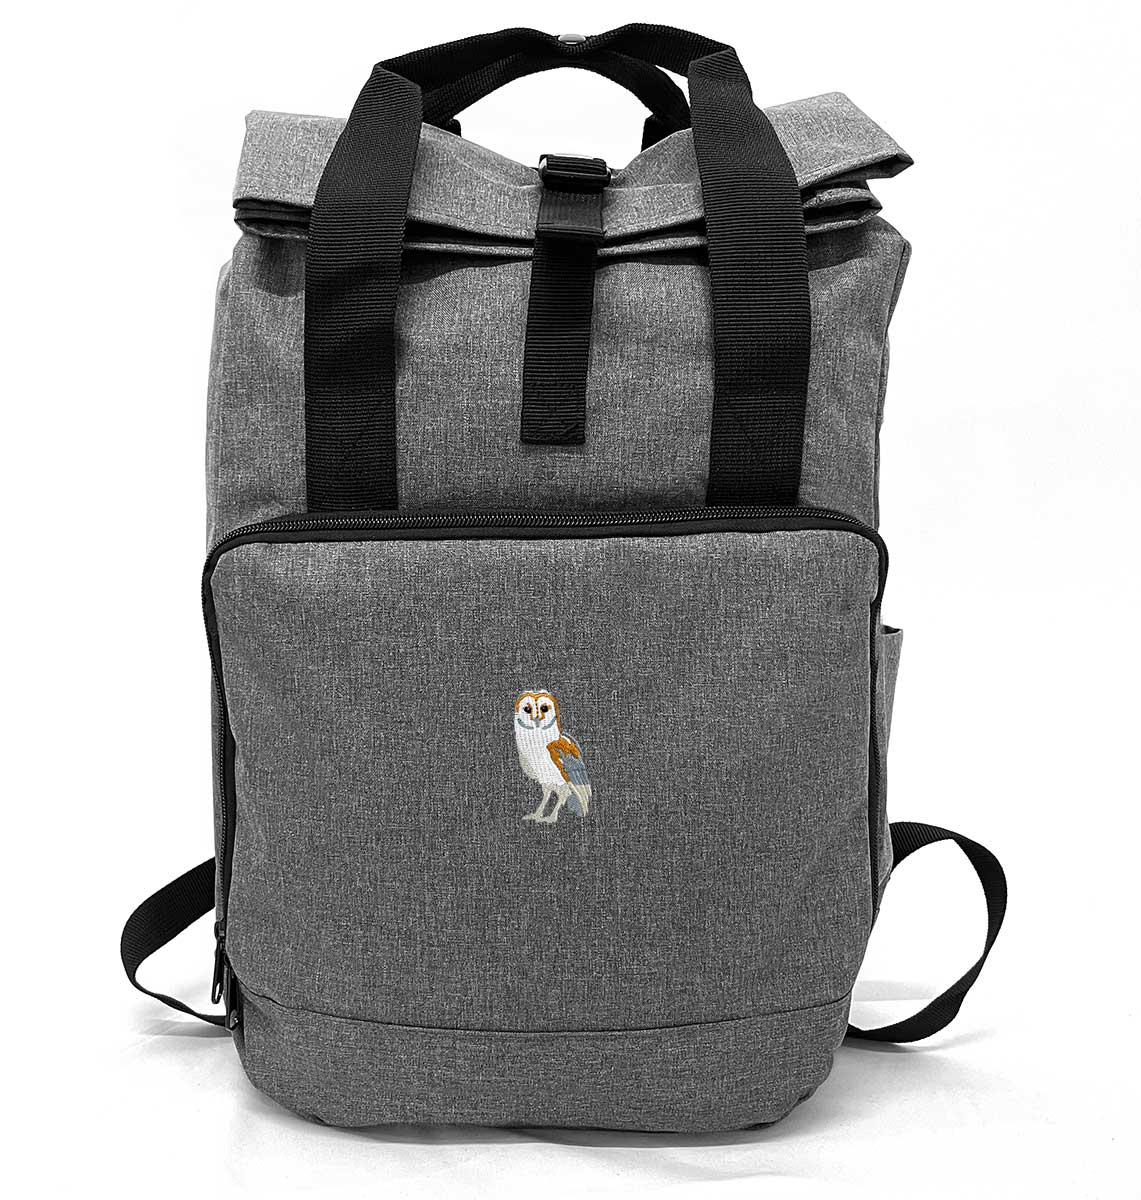 Barn Owl Large Roll-top Laptop Recycled Backpack - Blue Panda